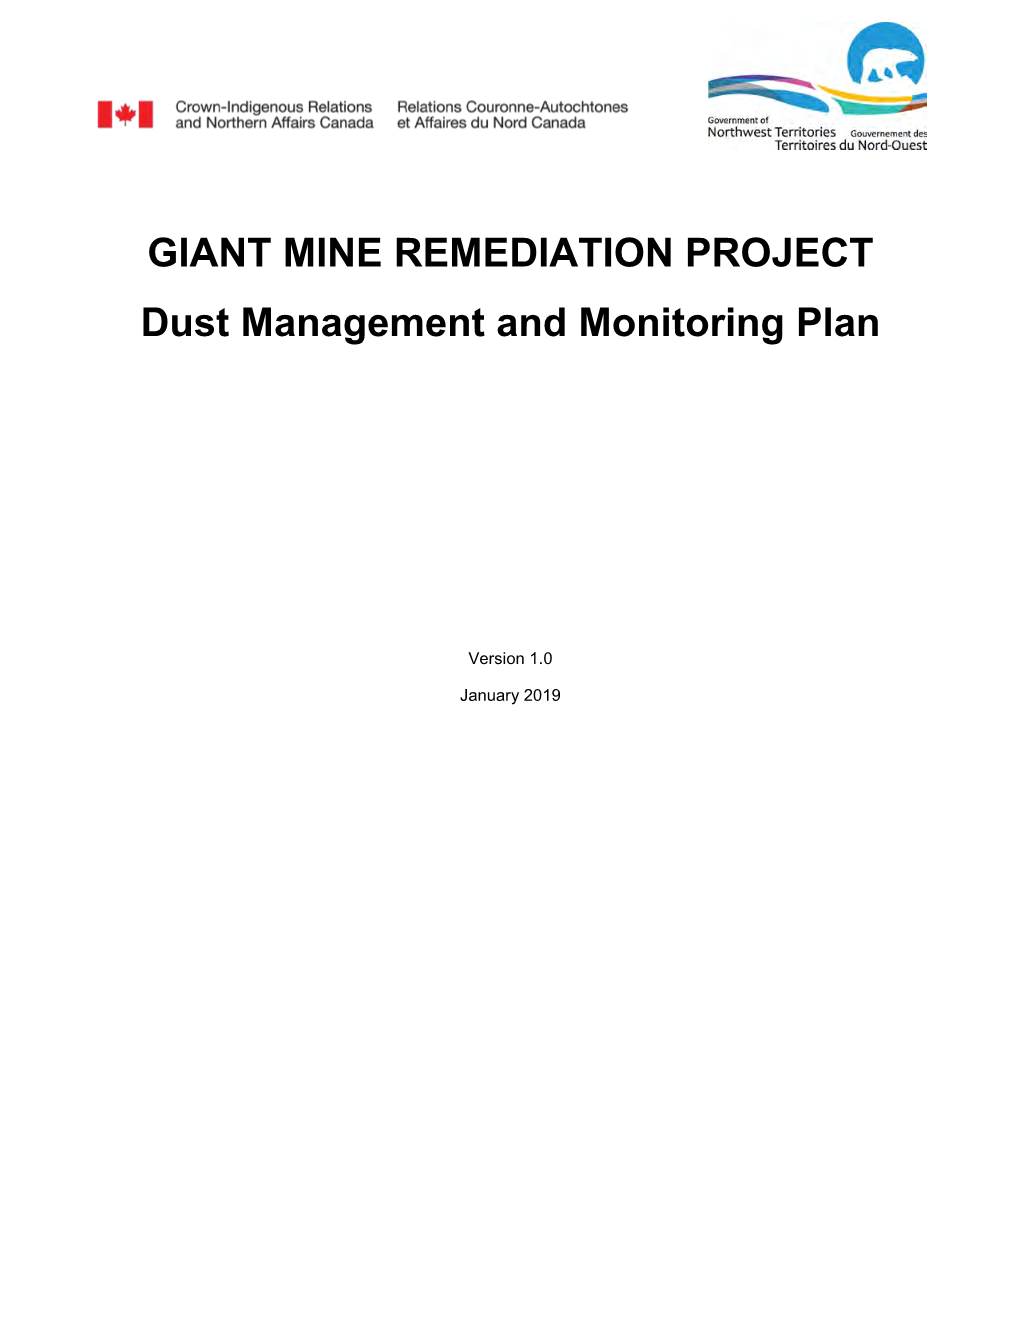 GIANT MINE REMEDIATION PROJECT Dust Management and Monitoring Plan